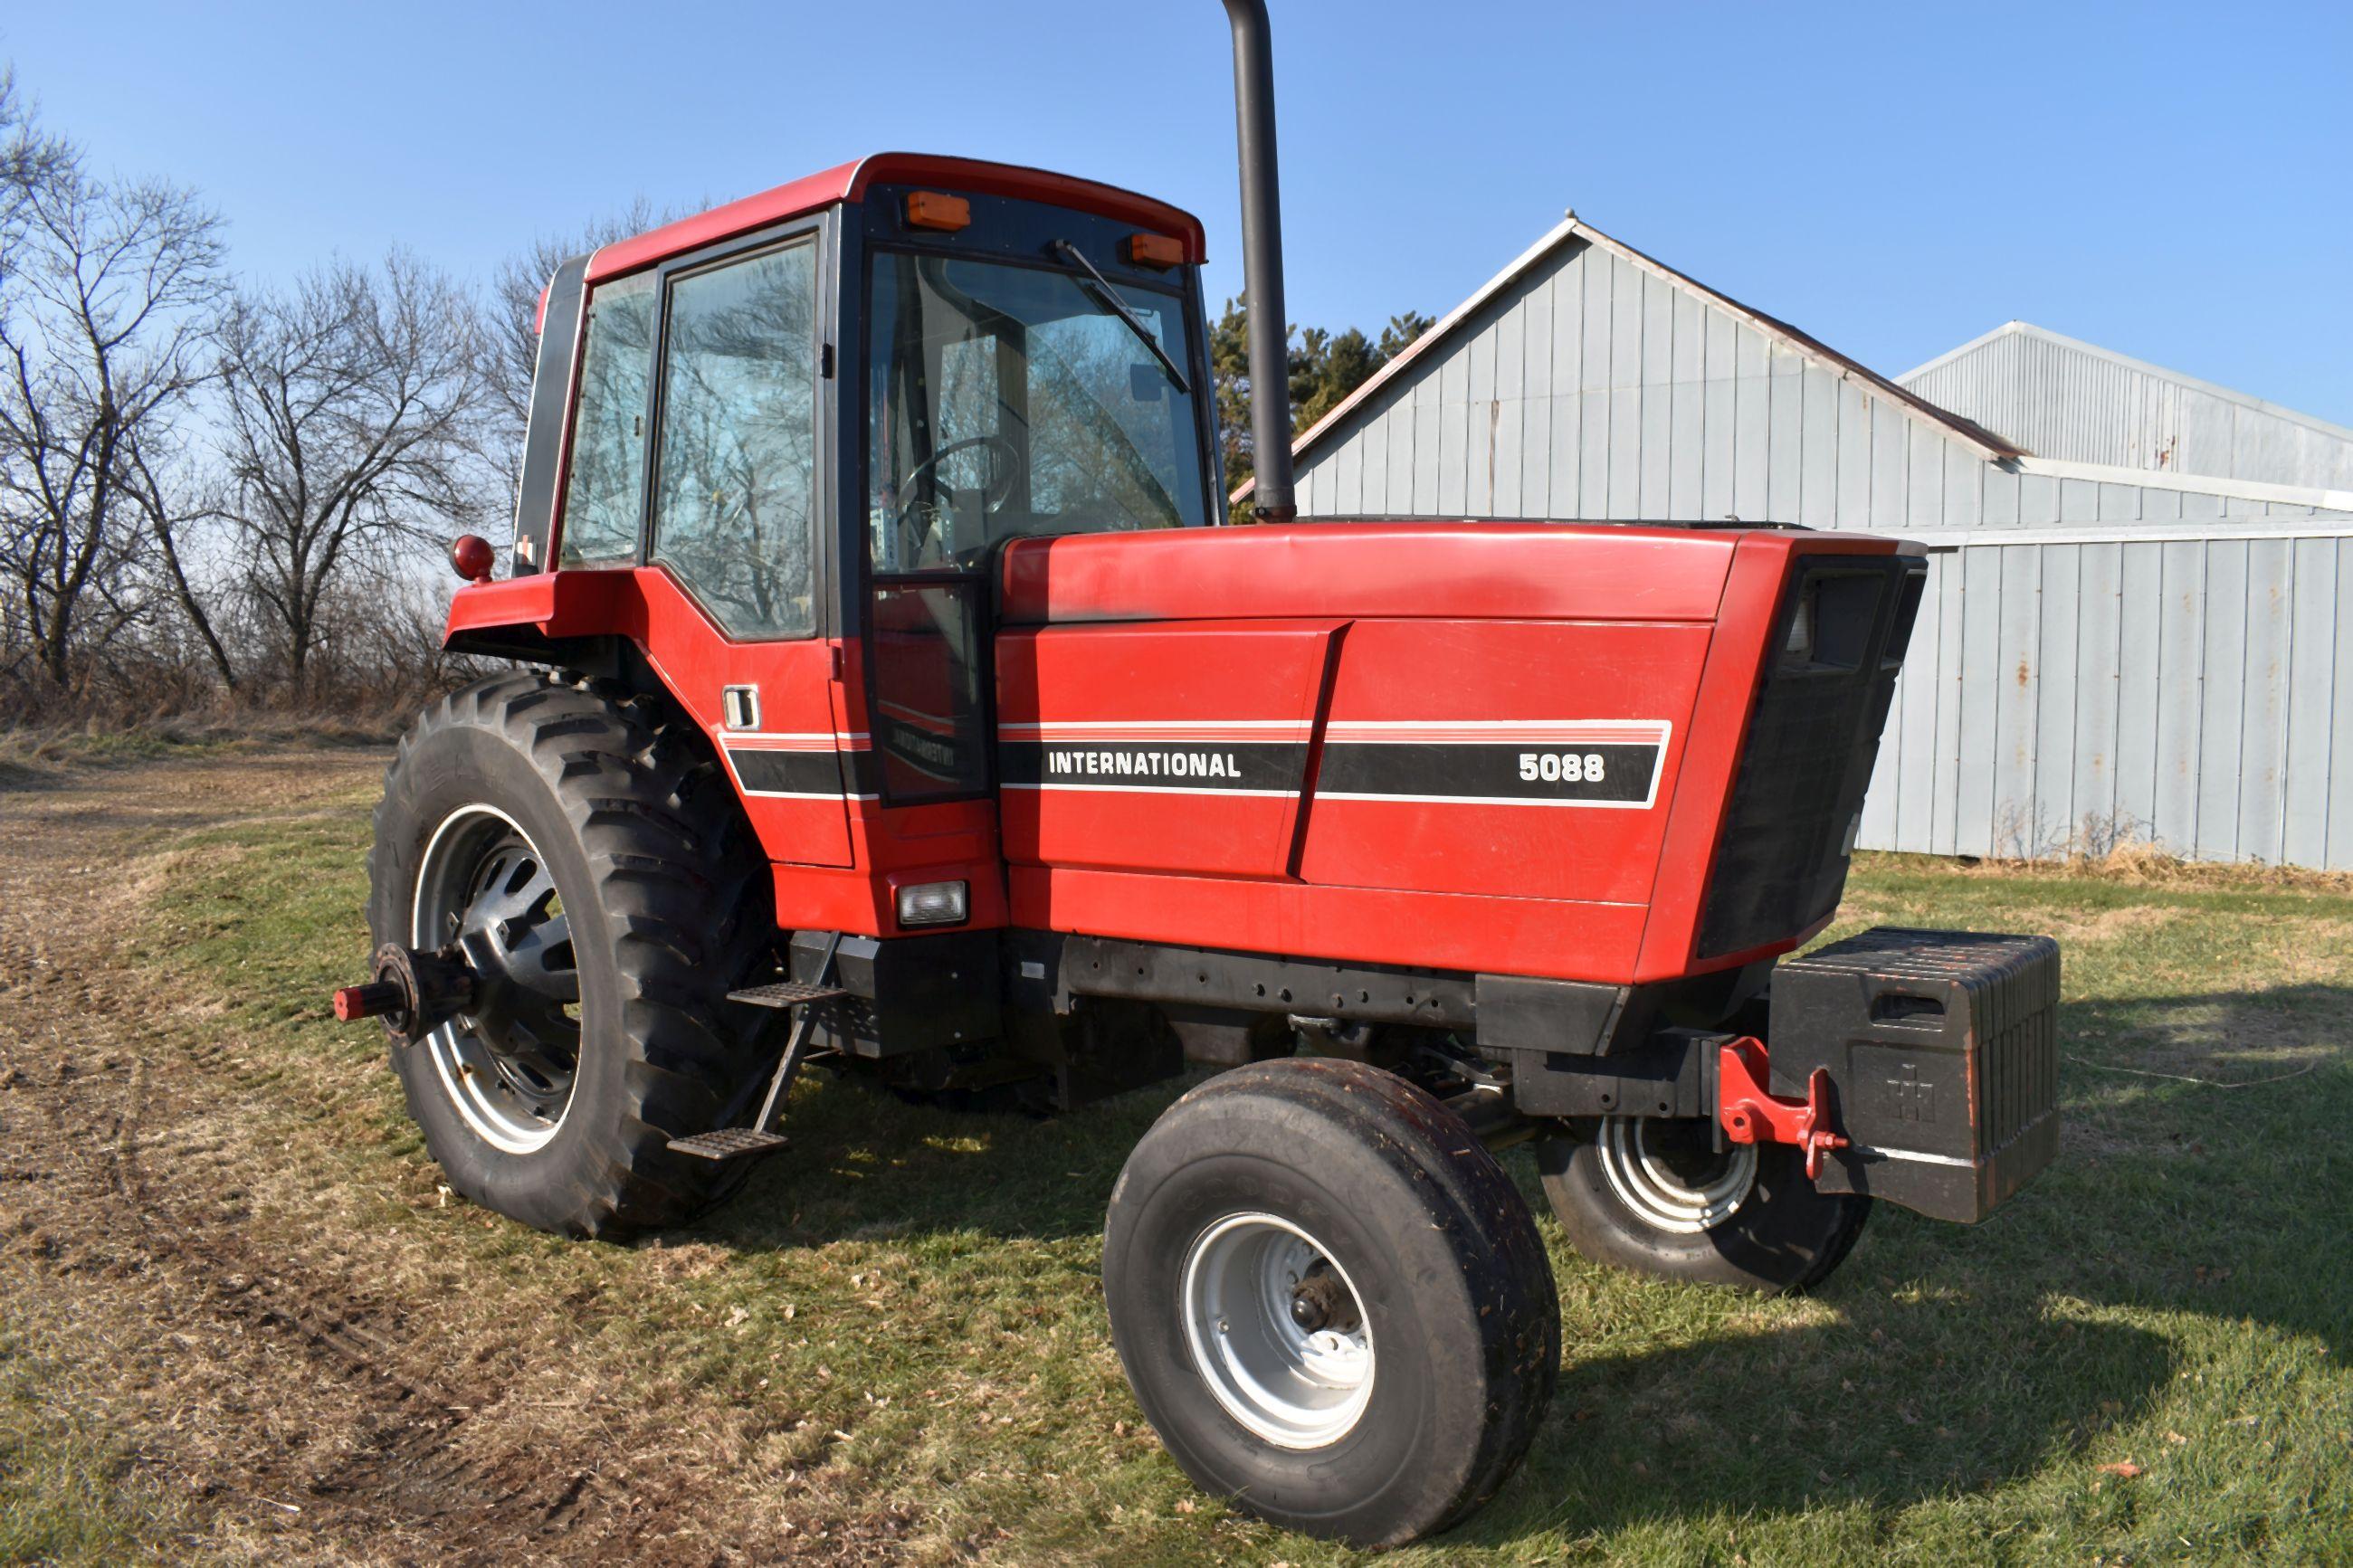 1982 IHC 5088, 2WD, 7,149 Hours, 18.4x38 Duals 65%, 3pt, 2hyd, 540/1000 PTO, 10 Suit Case Weights, E